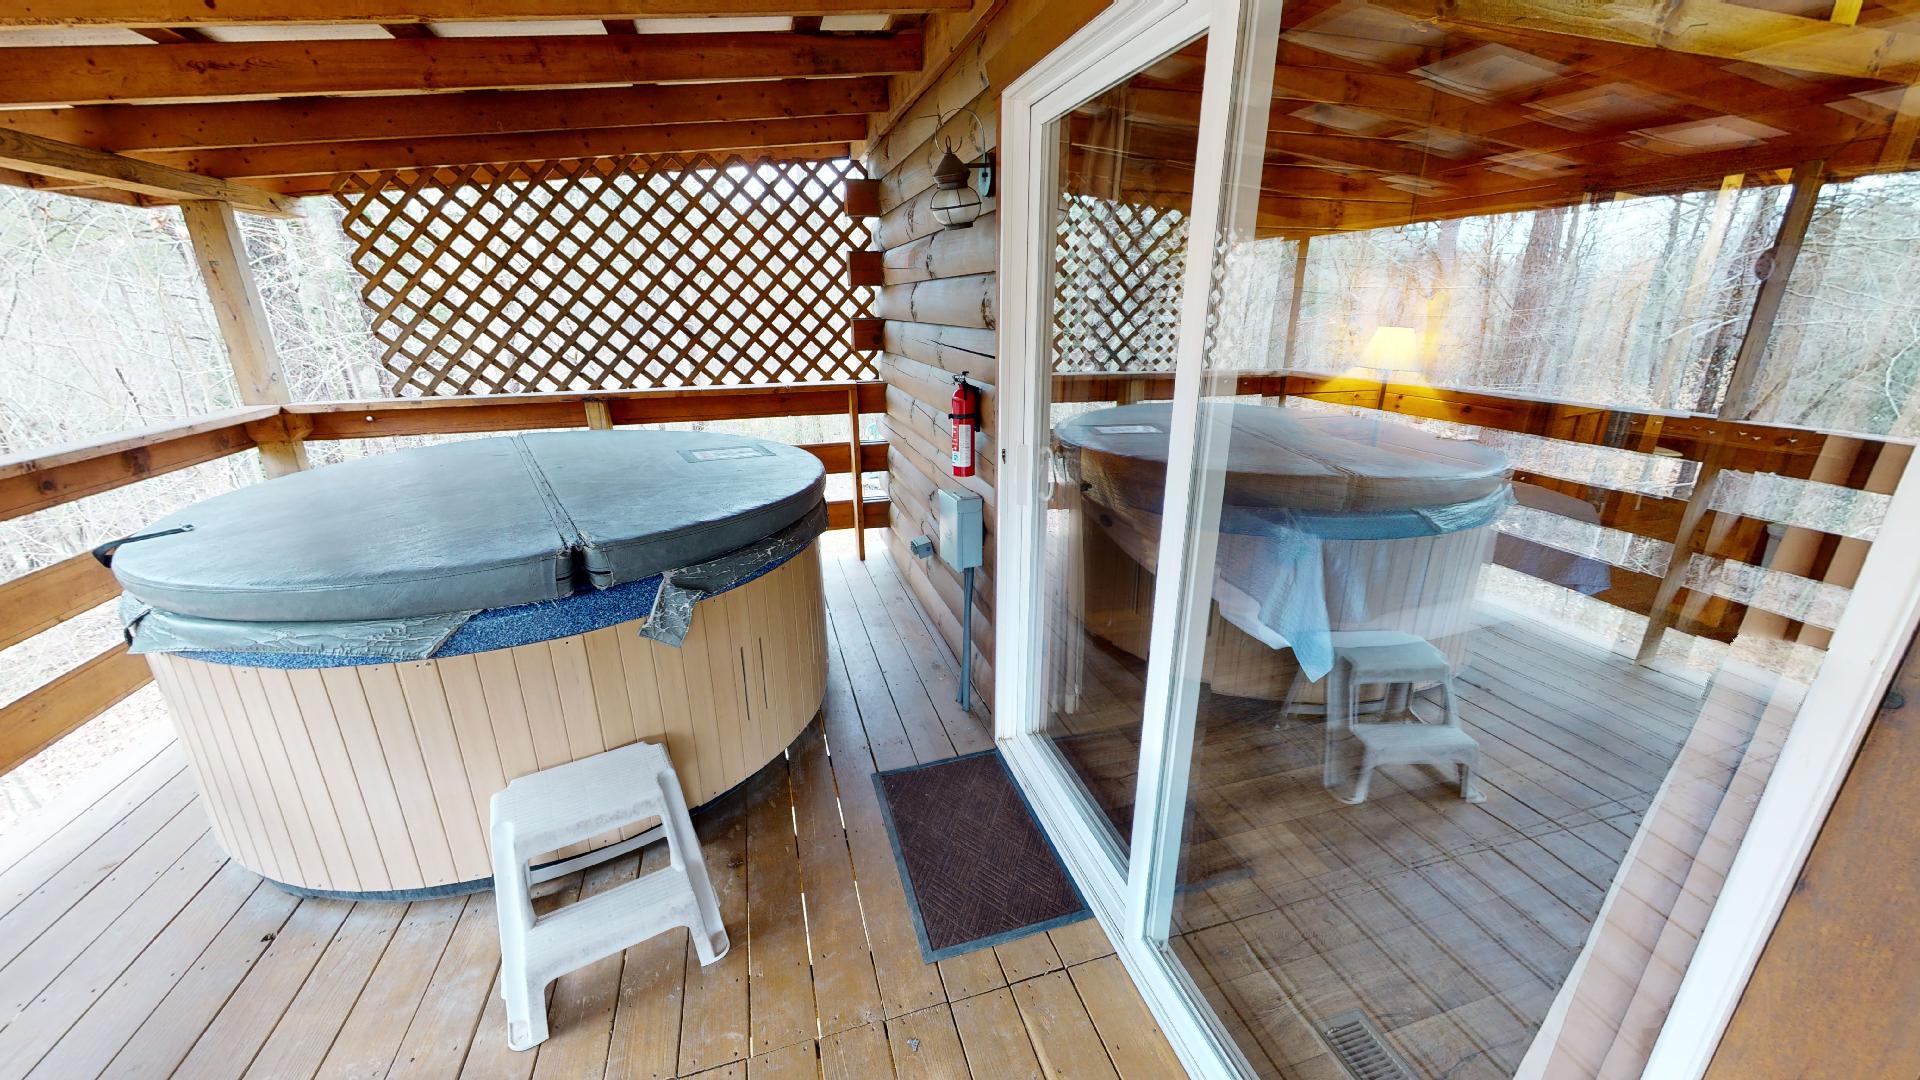 Photo 663_9237.jpg - 2 person hot tub on the private back porch.